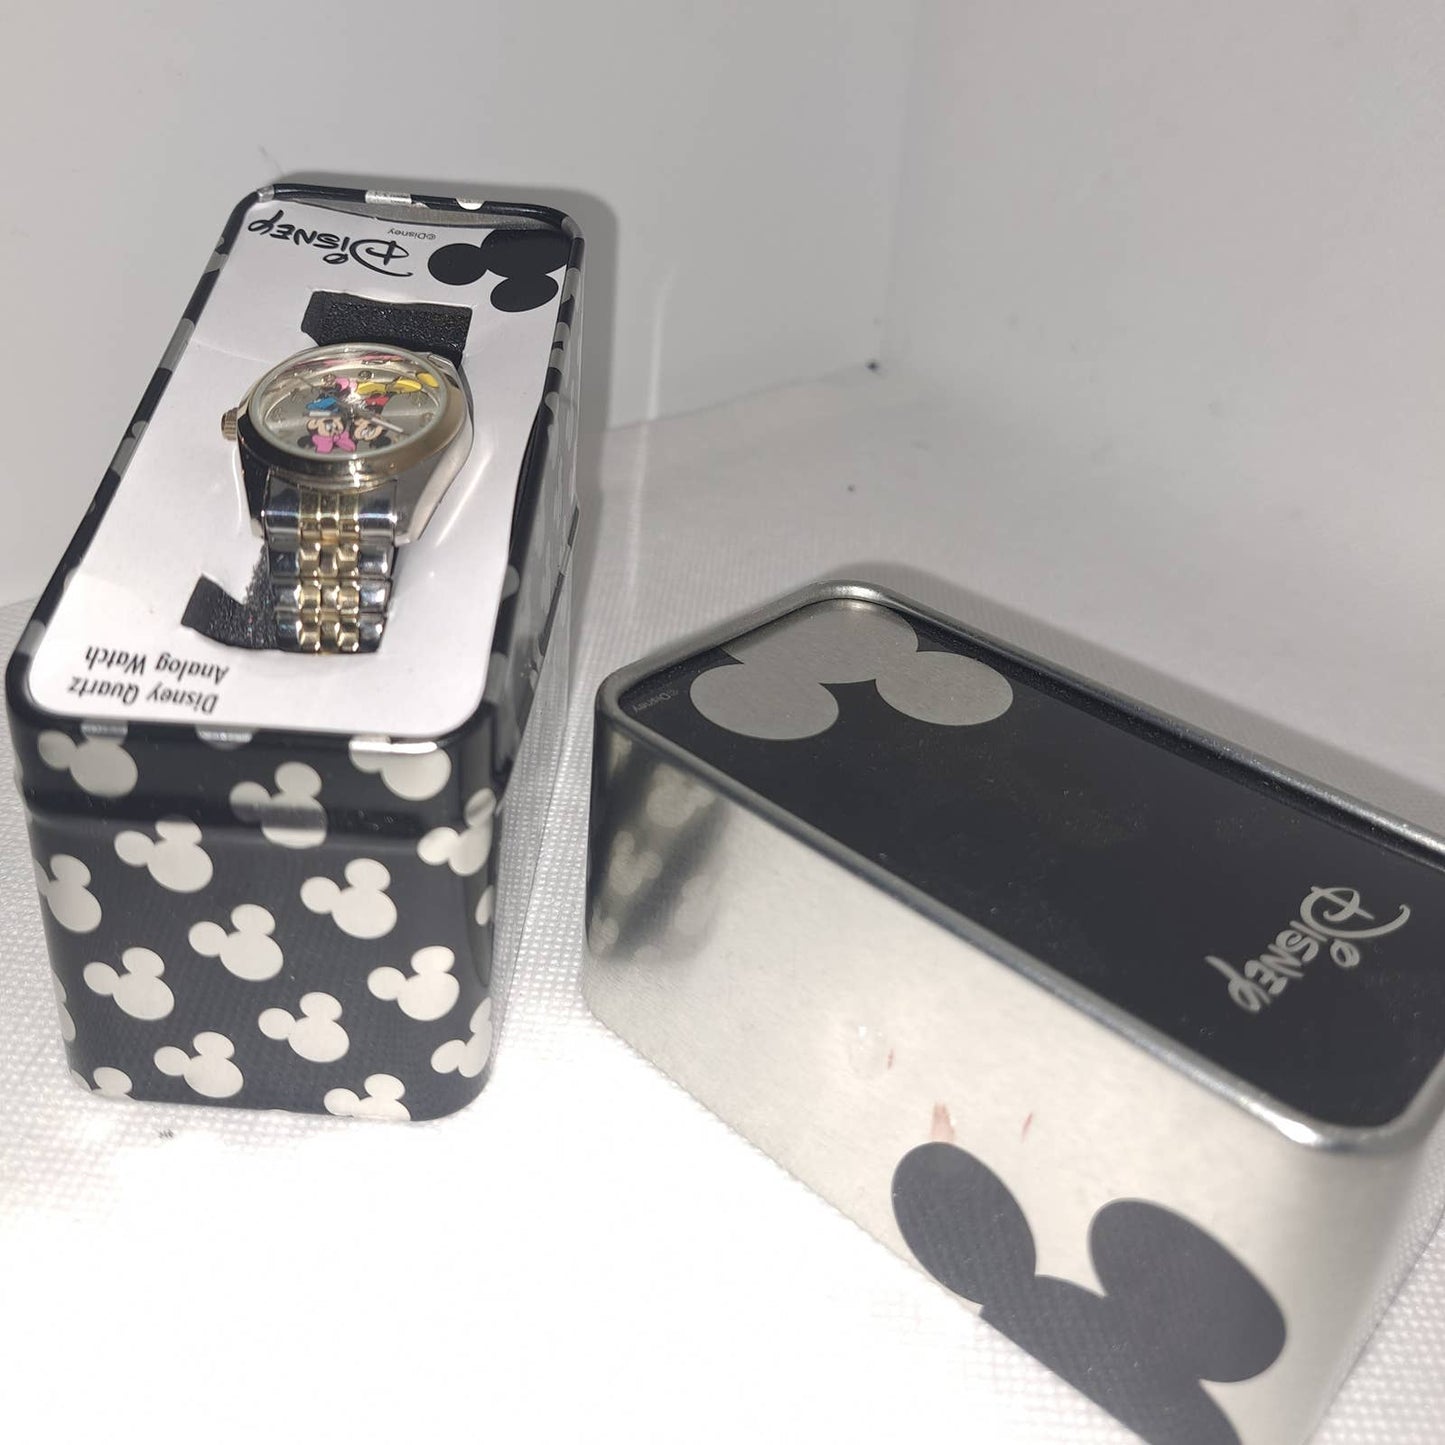 NEW in Collectors Tin Box - Stainless & Gold Stretch Band Mickey & Minnie